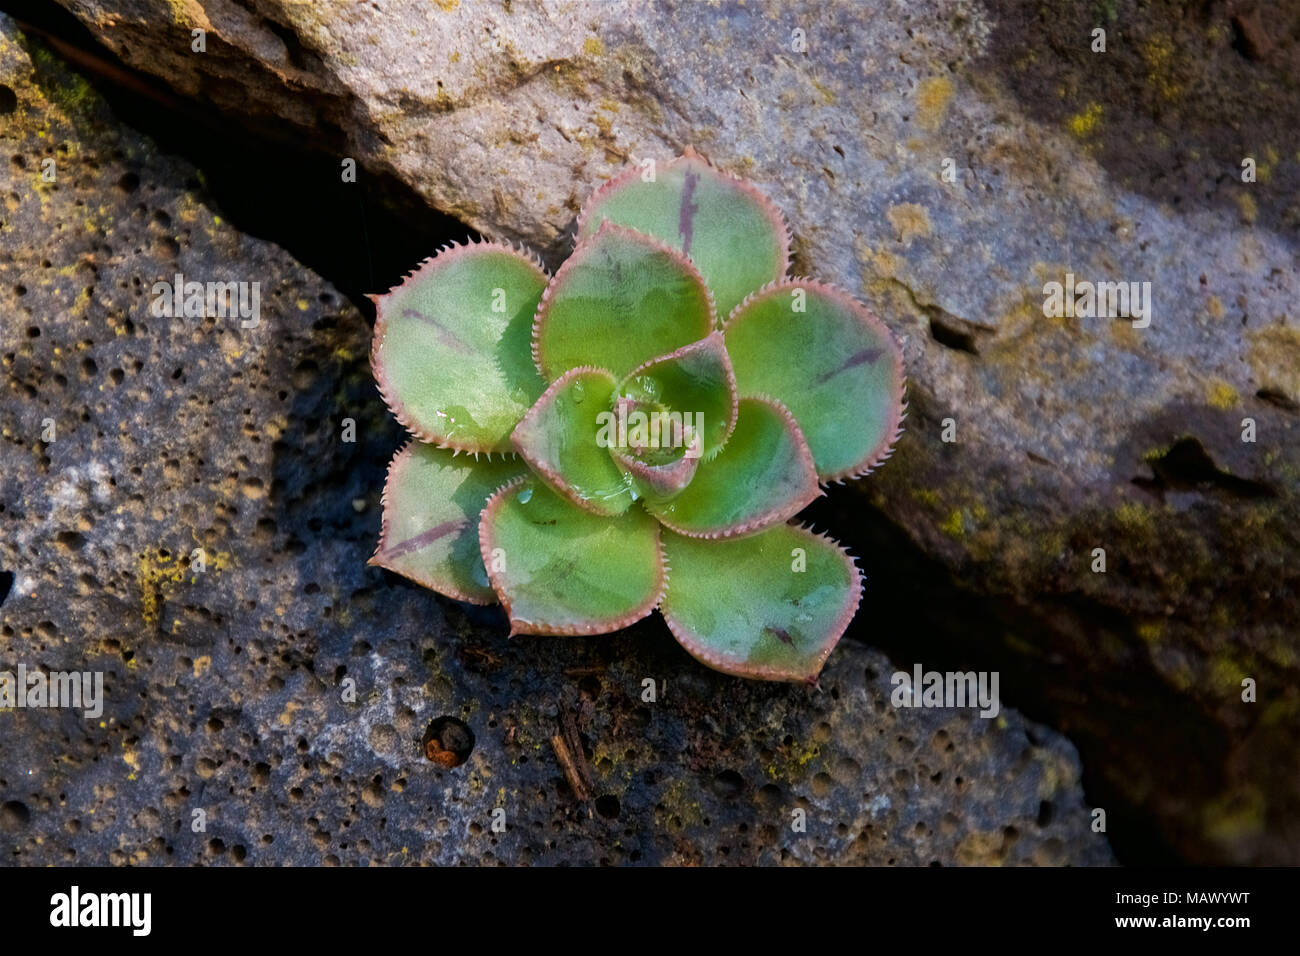 Close-up view of a small tree houseleek (Aeonium sp.) plant within a stone wall (El Hierro, Canary Islands, Spain) Stock Photo